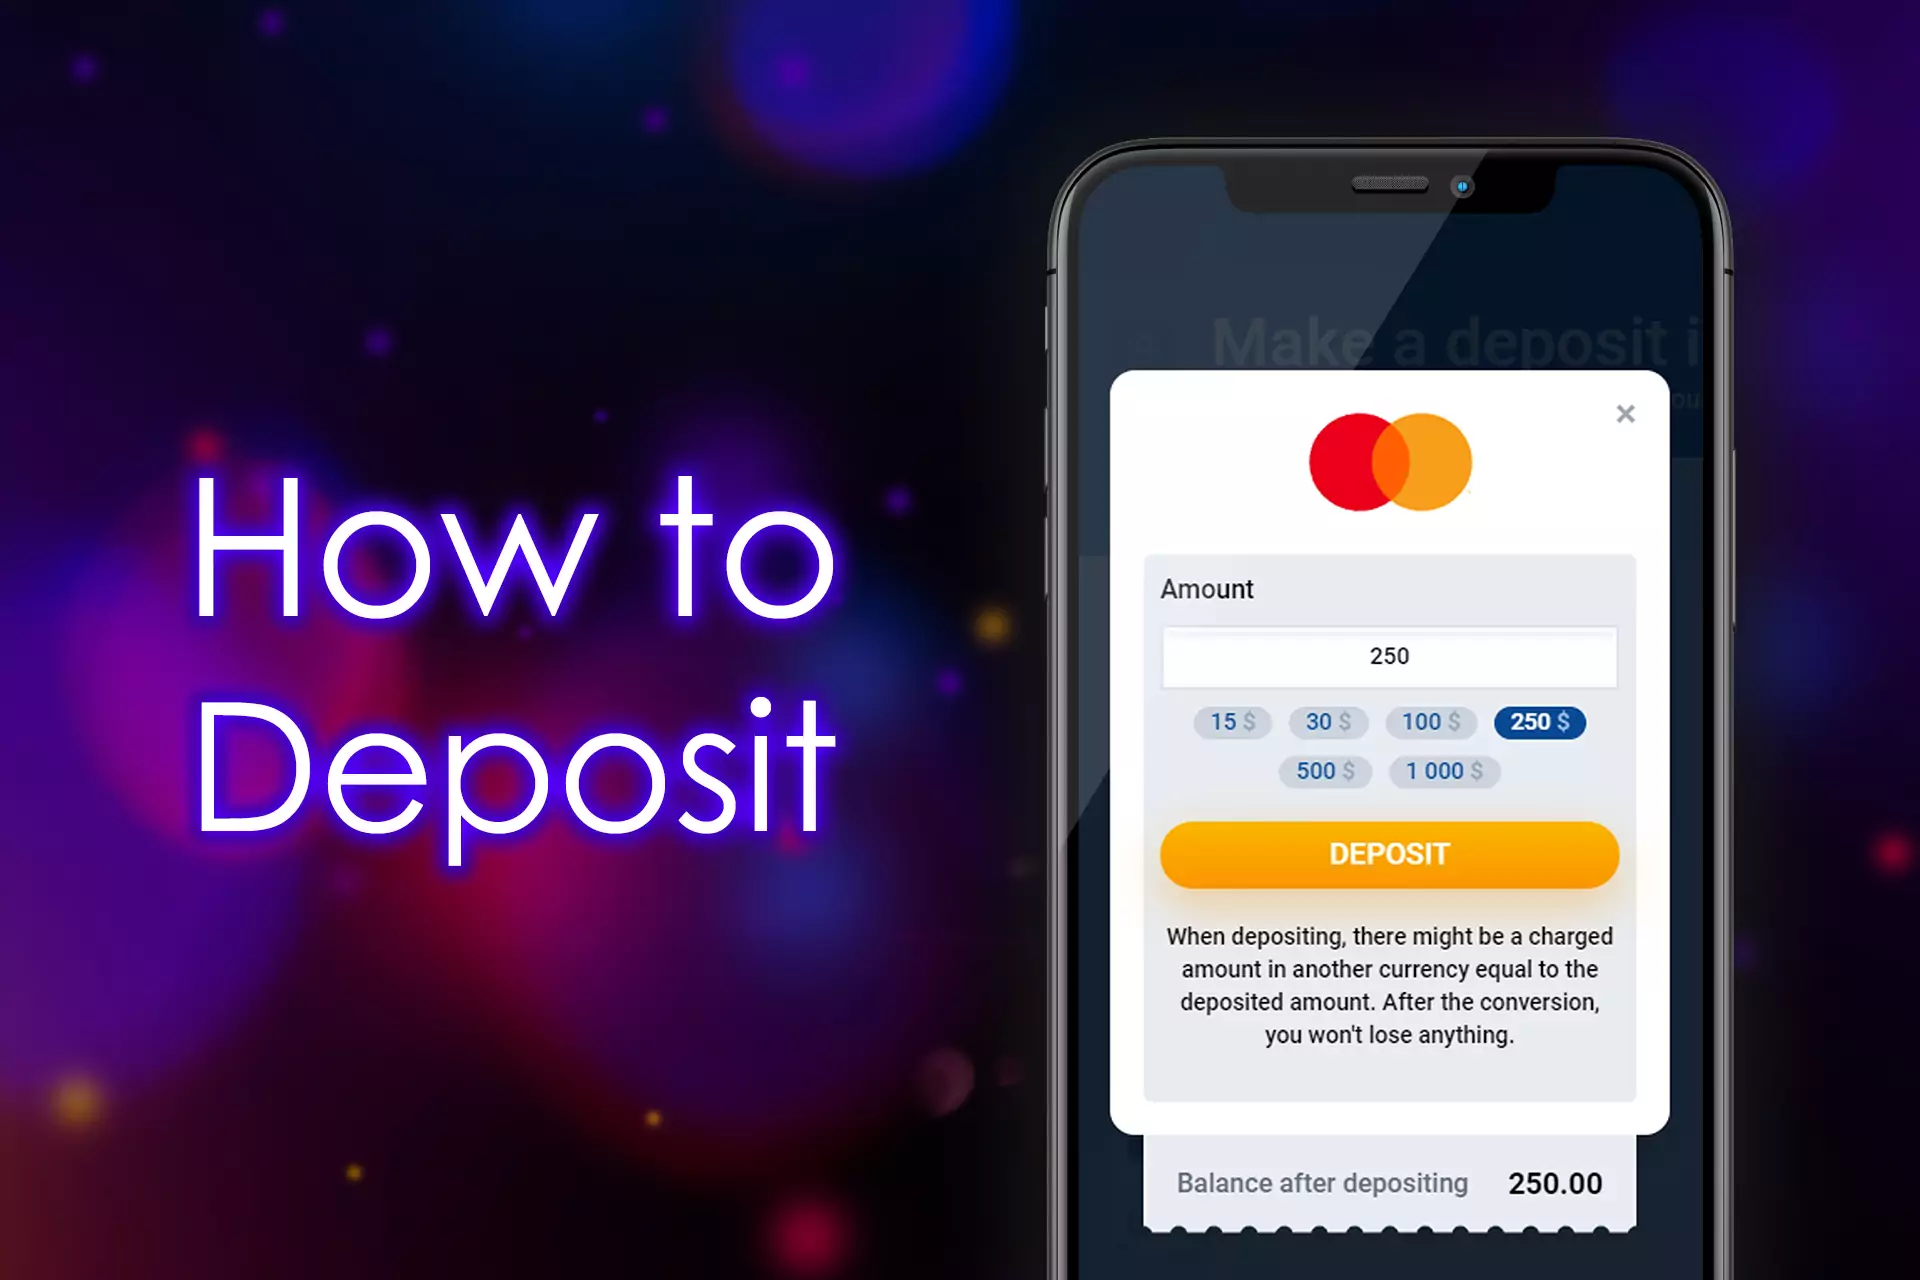 When you get a Mastercard card, you should top up with money at your bank, and after that, you can make a deposit to your casino account.